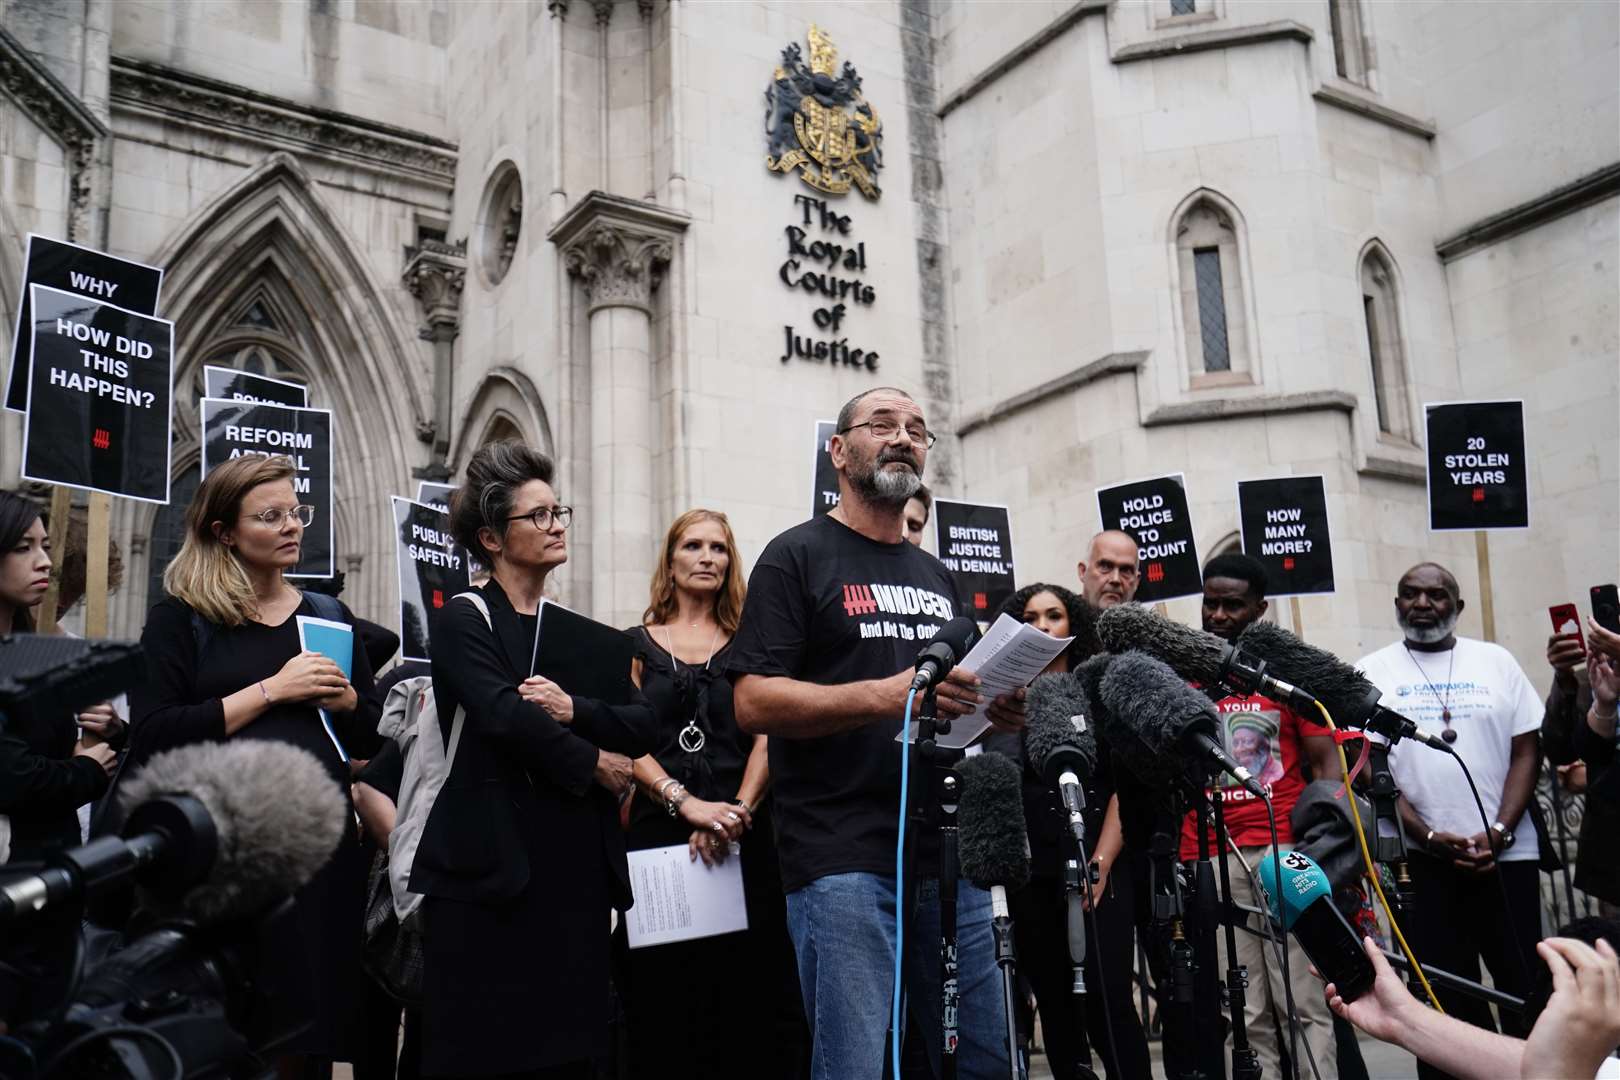 Andrew Malkinson reads a statement outside the Royal Courts of Justice after being cleared by the Court of Appeal (Jordan Pettitt/PA)